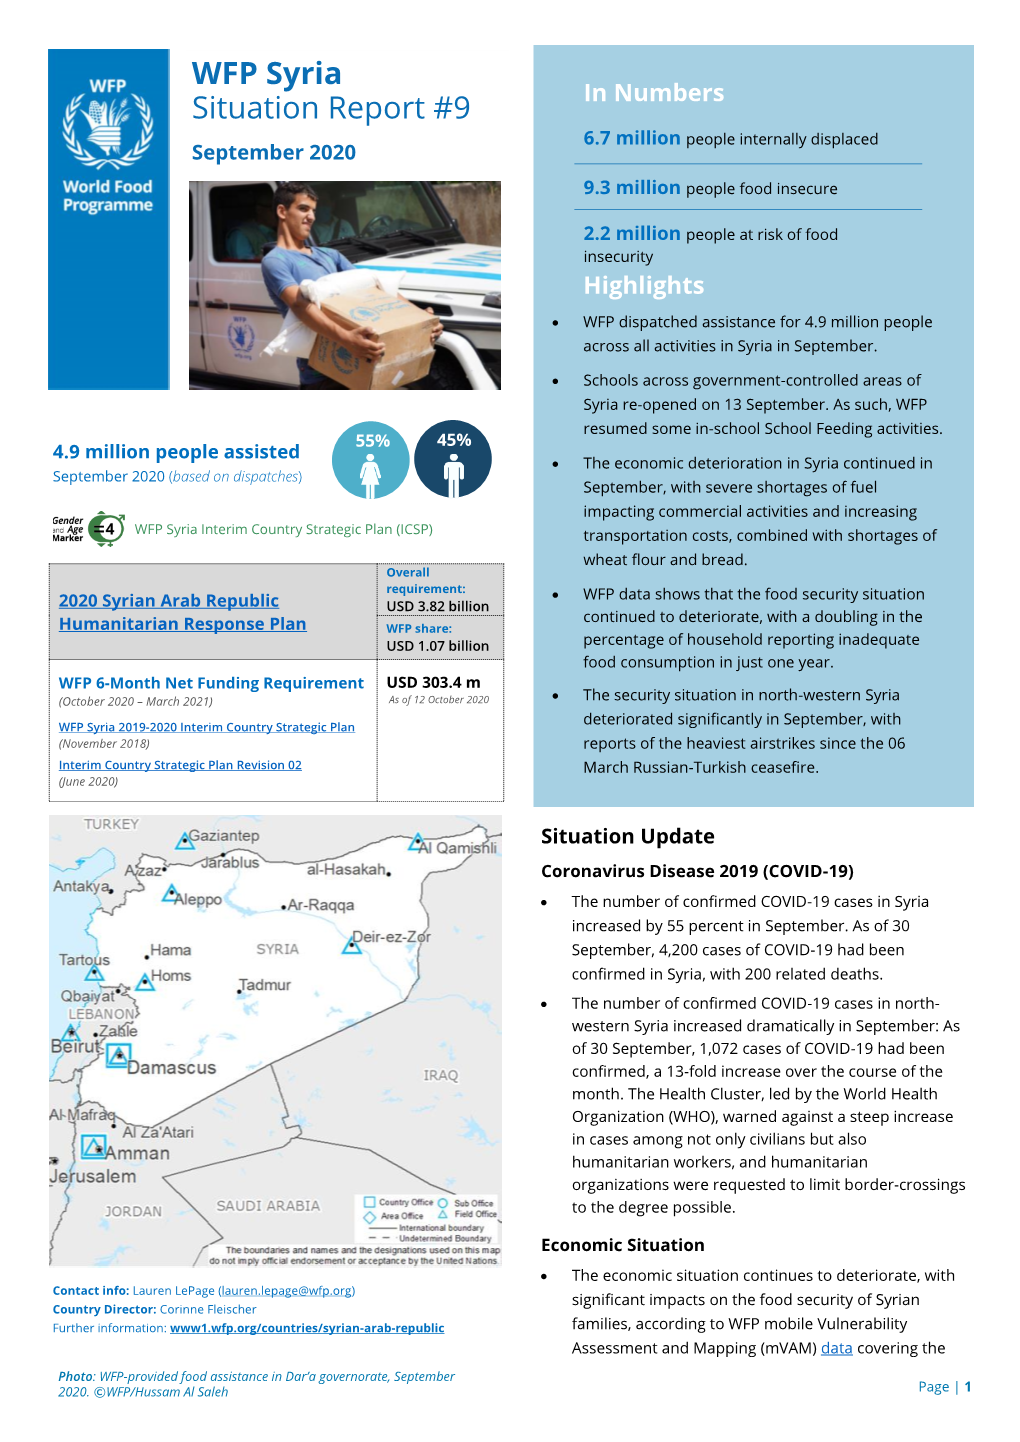 WFP Syria Situation Report #9 Page | 2 September 2020